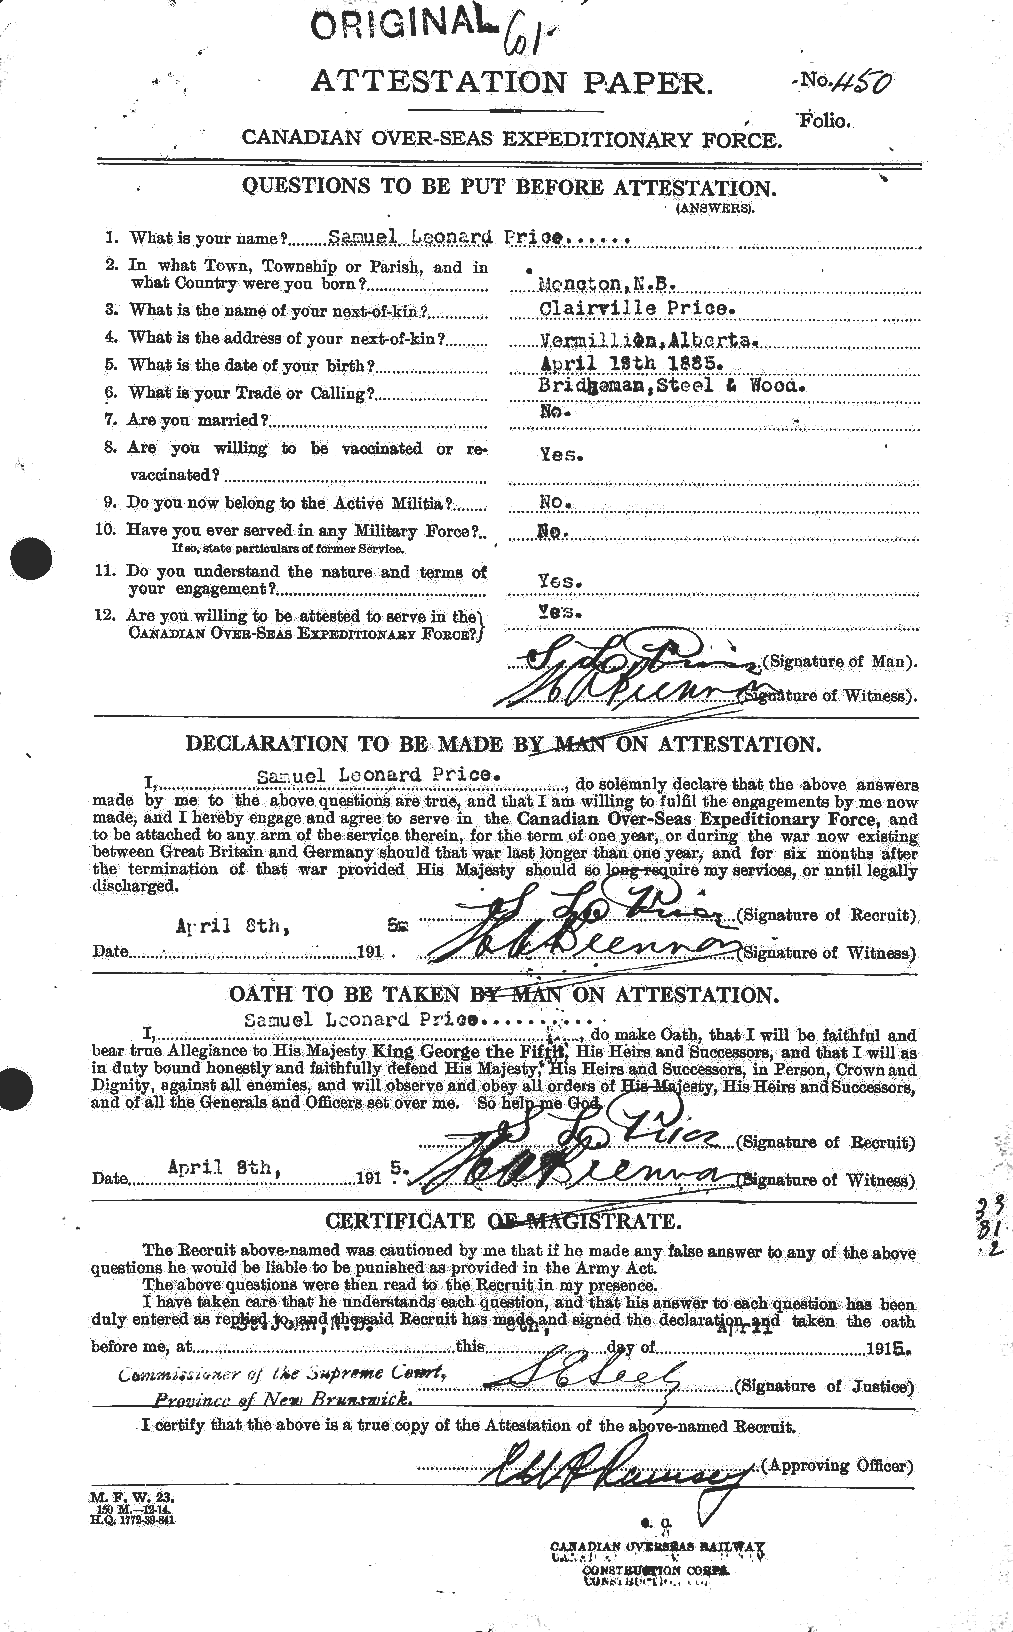 Personnel Records of the First World War - CEF 587352a